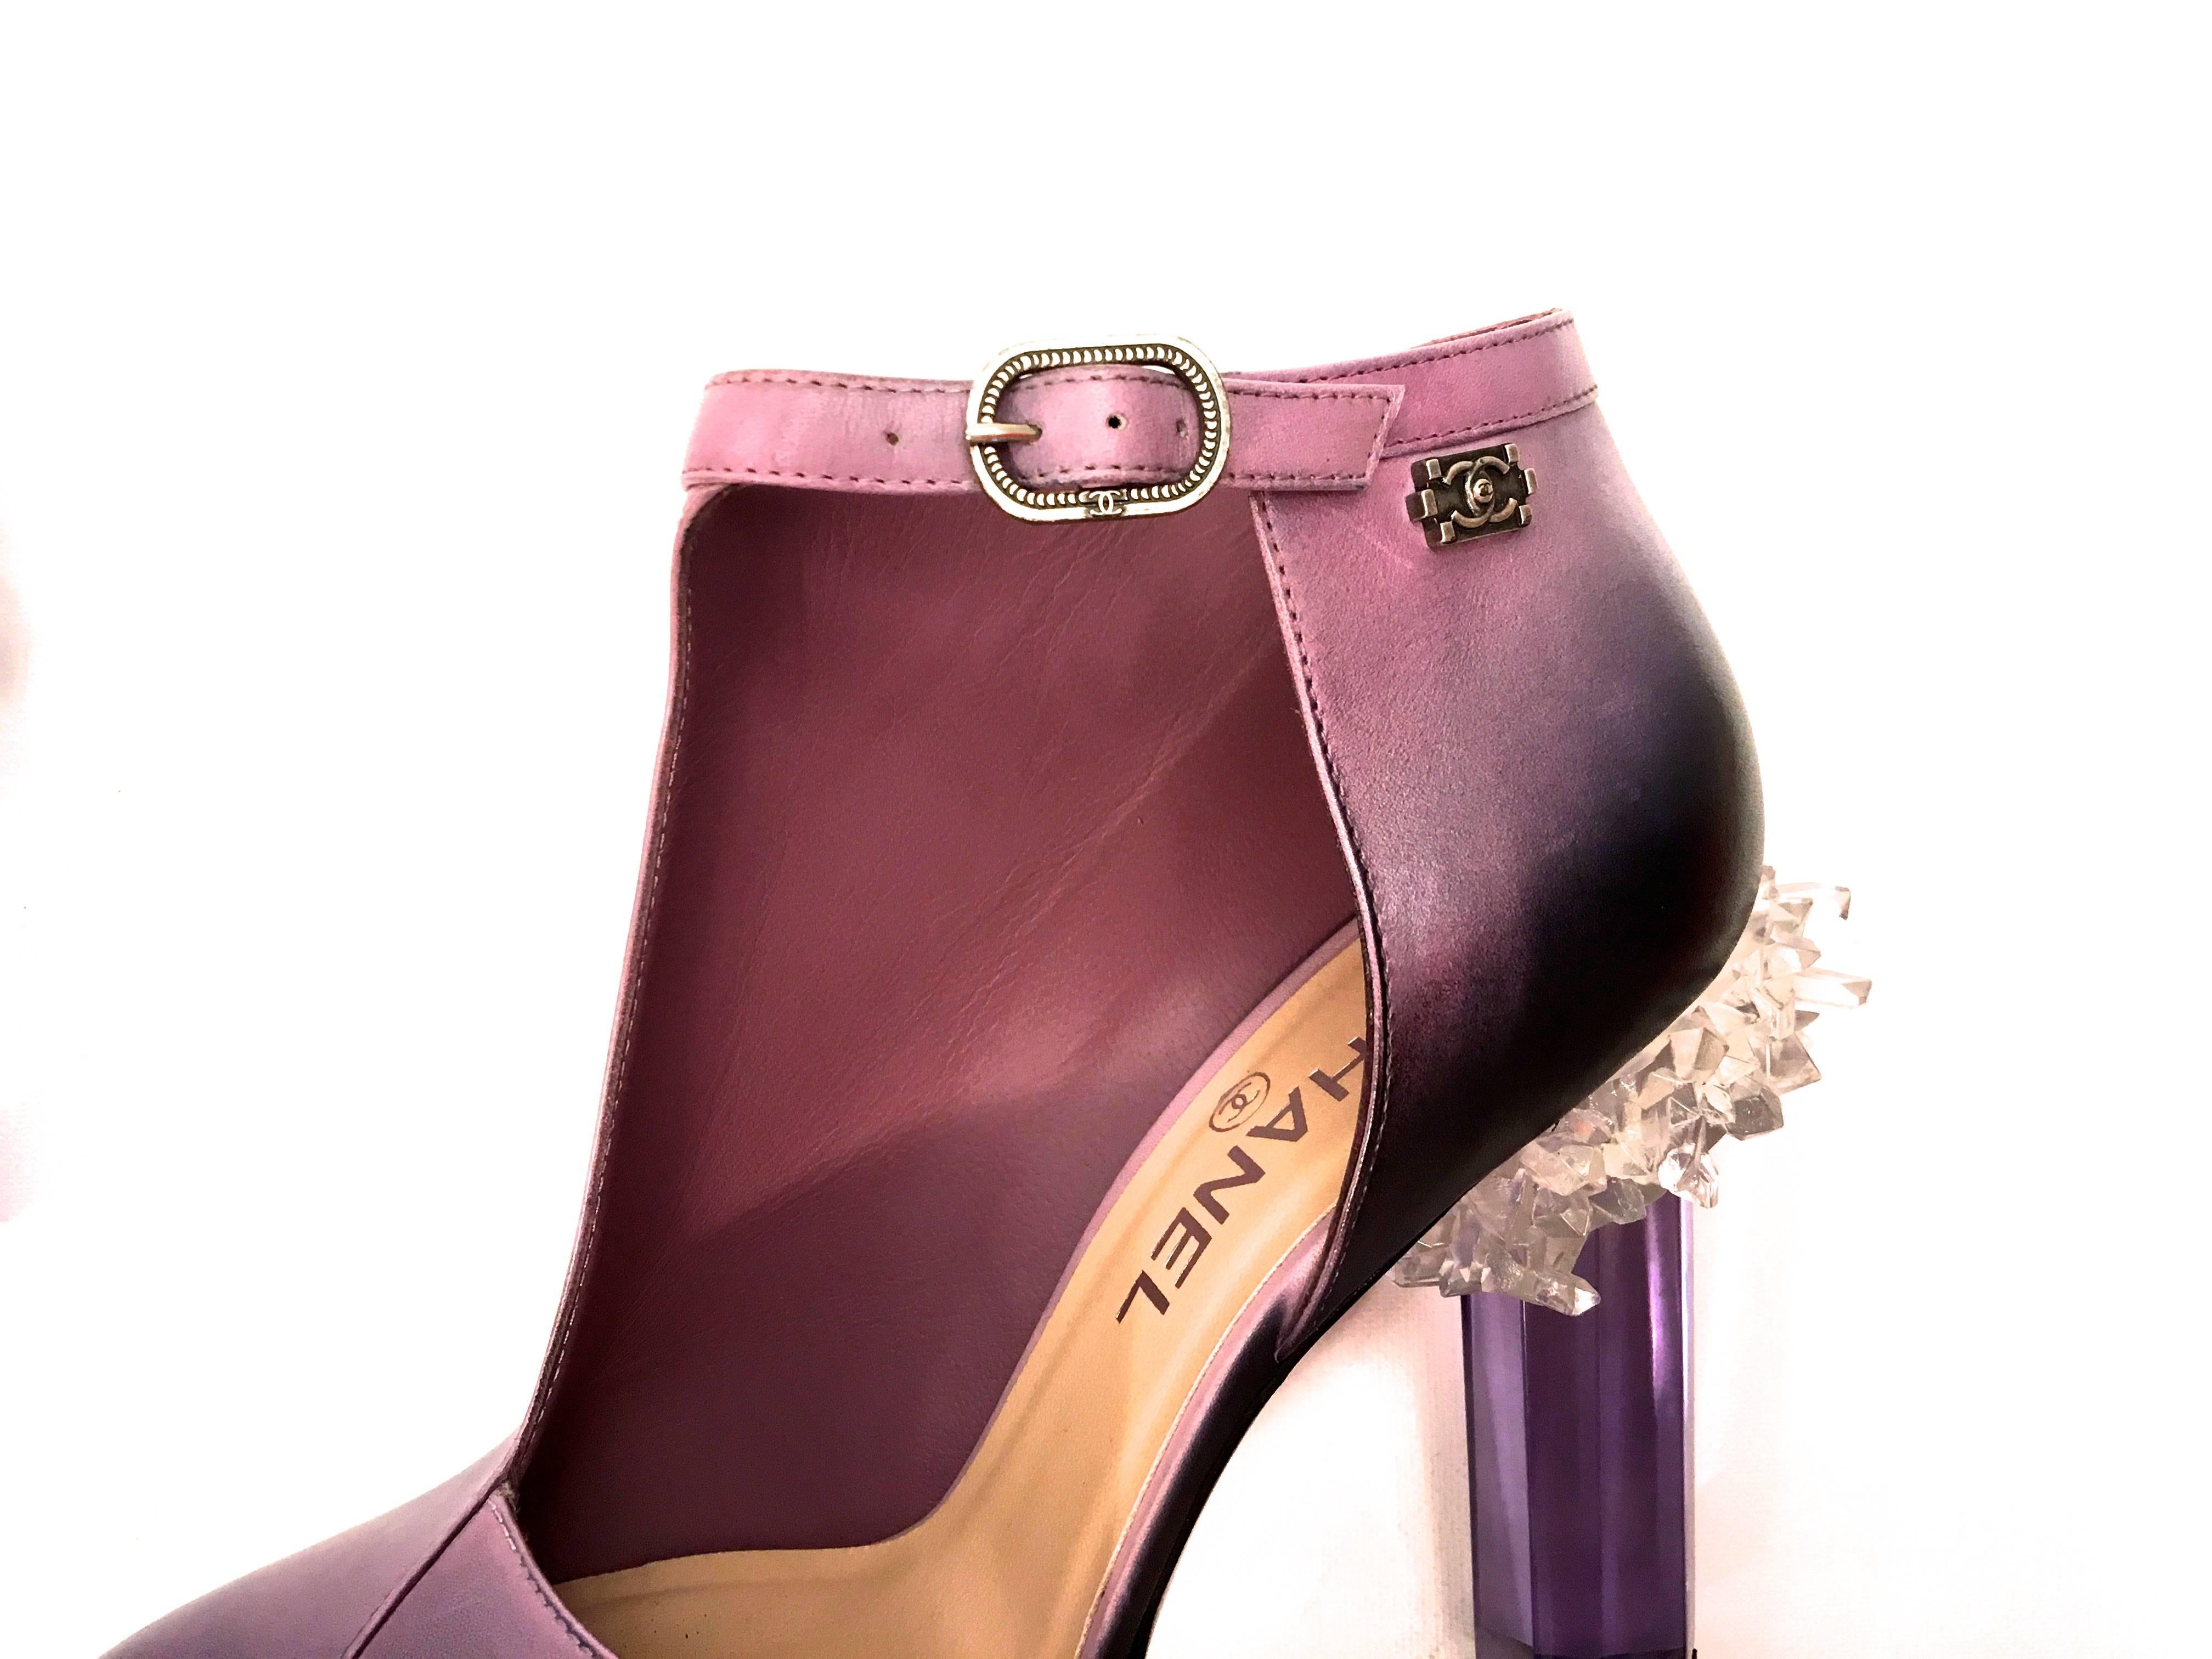 Rare Chanel Runway Boots - Purple and Black - Lucite Heels - Size 38 5